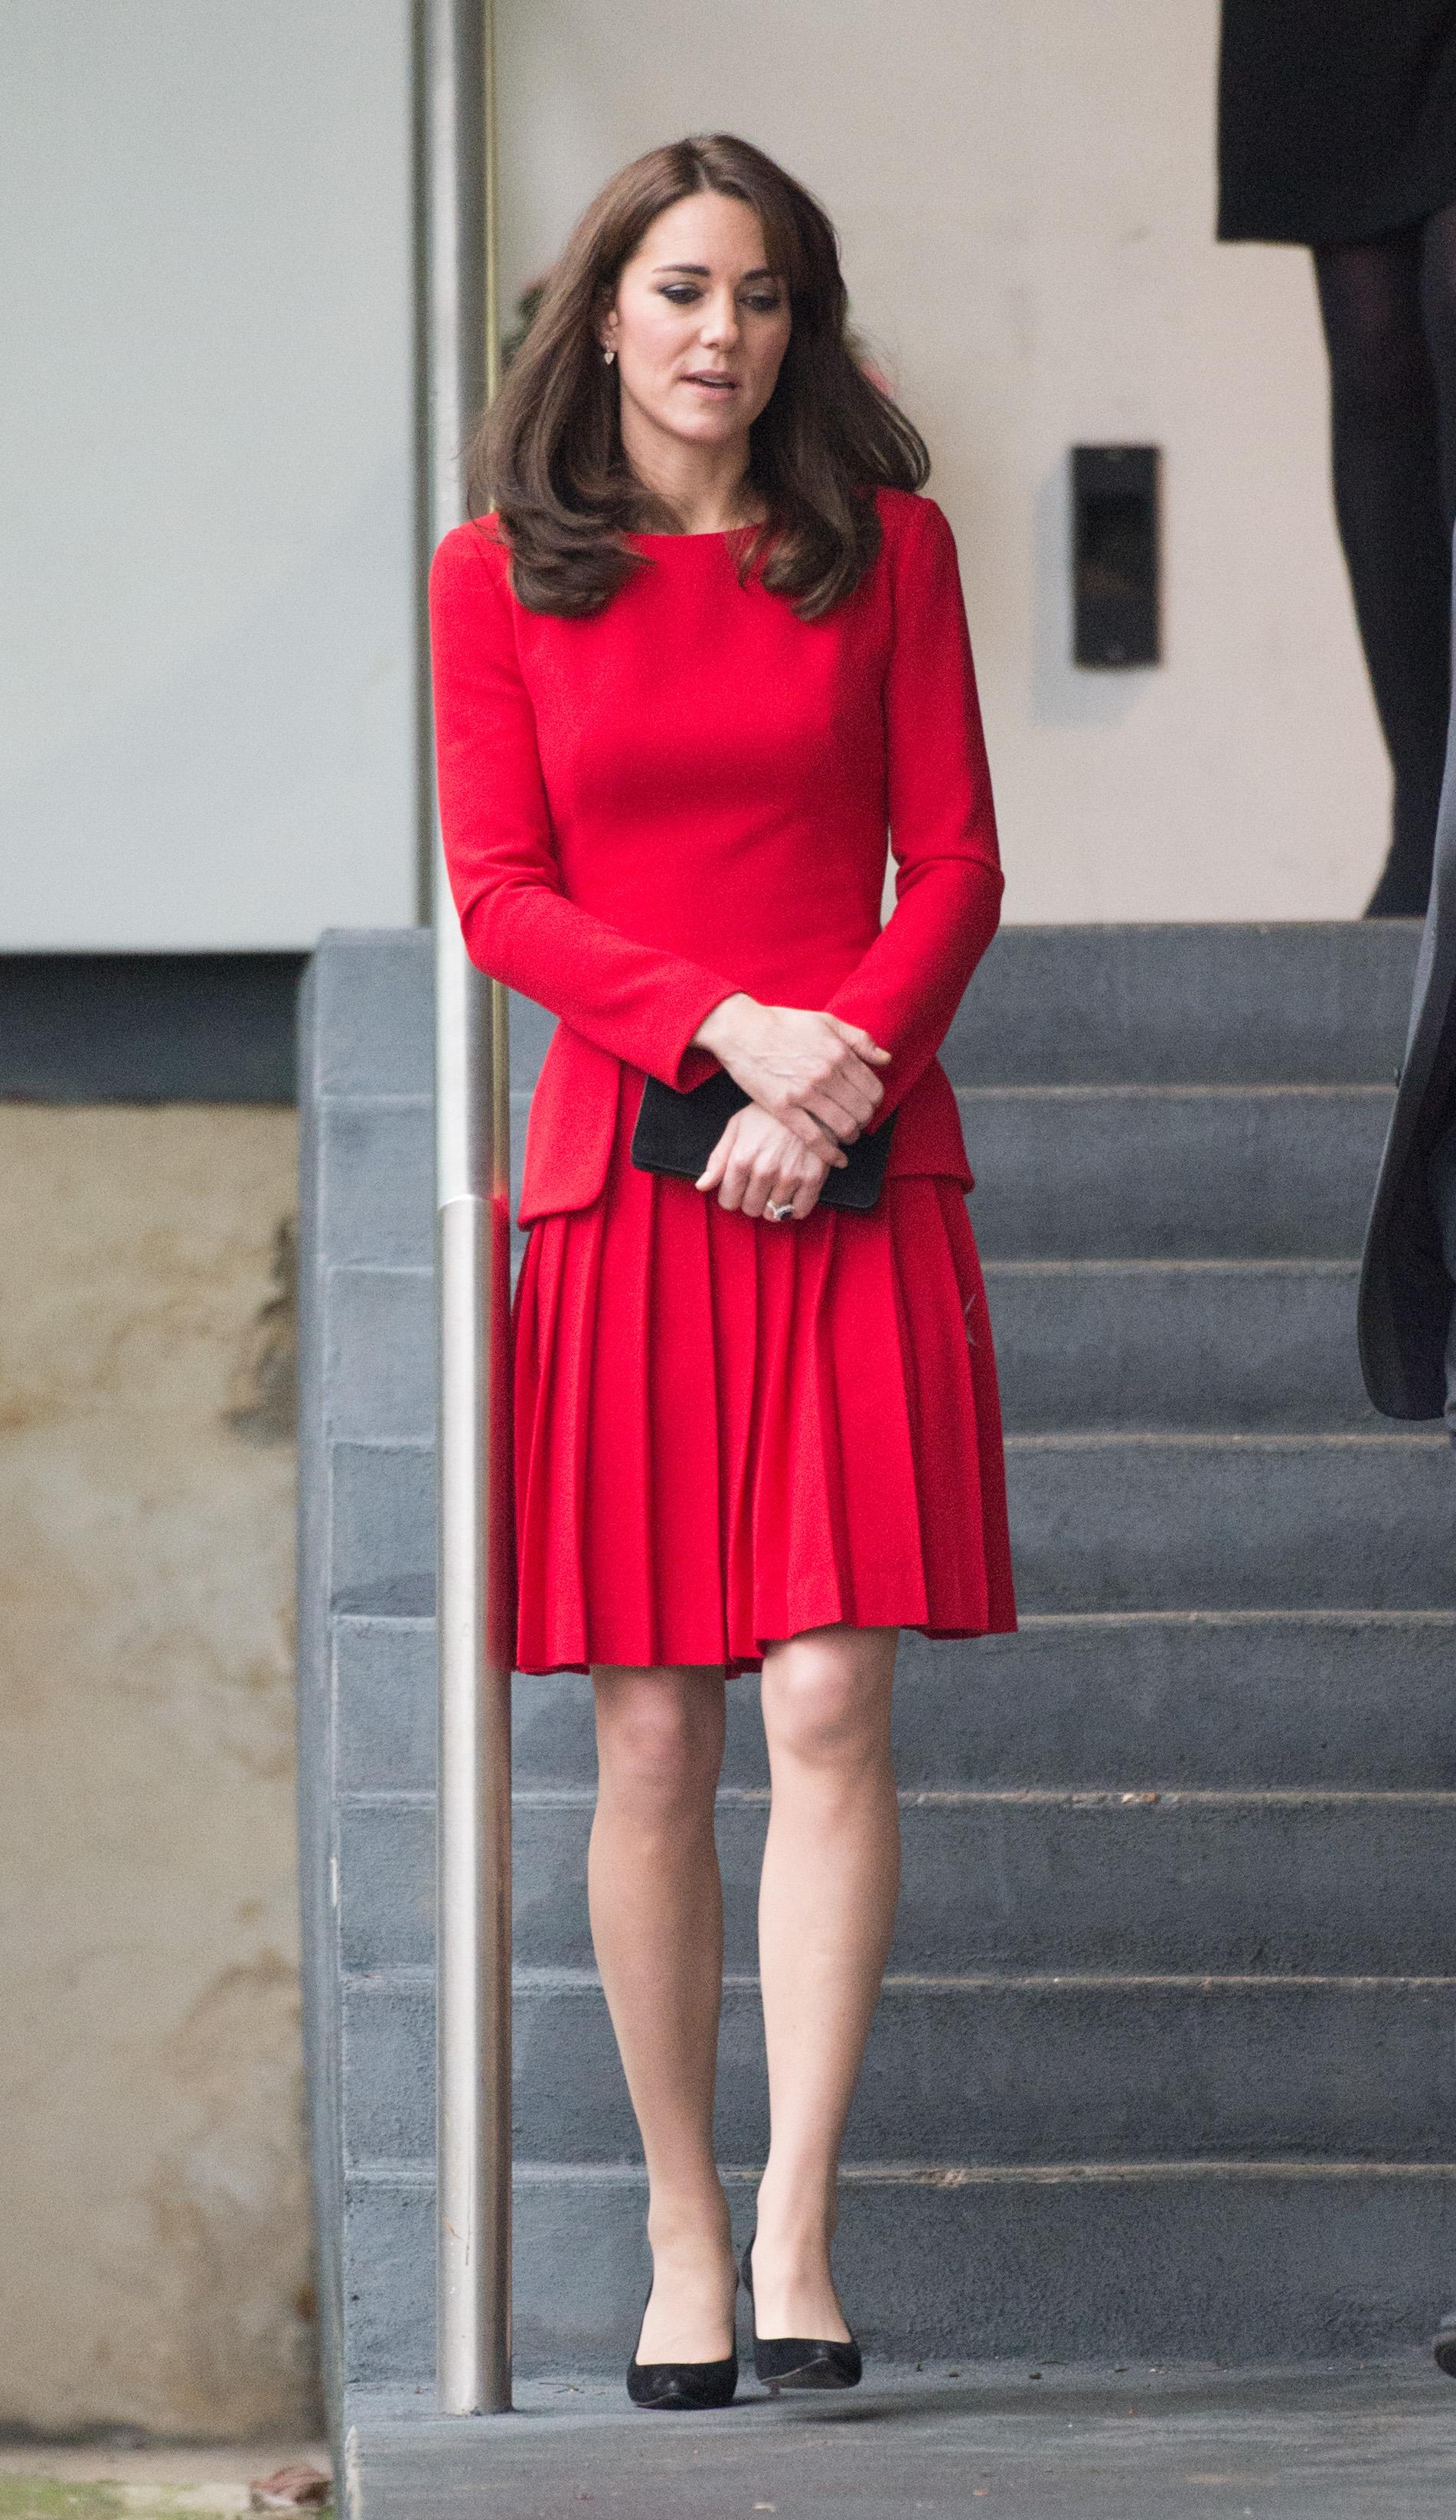 Kate Middleton Looks Shockingly Thin In A Recycled Red Dress!